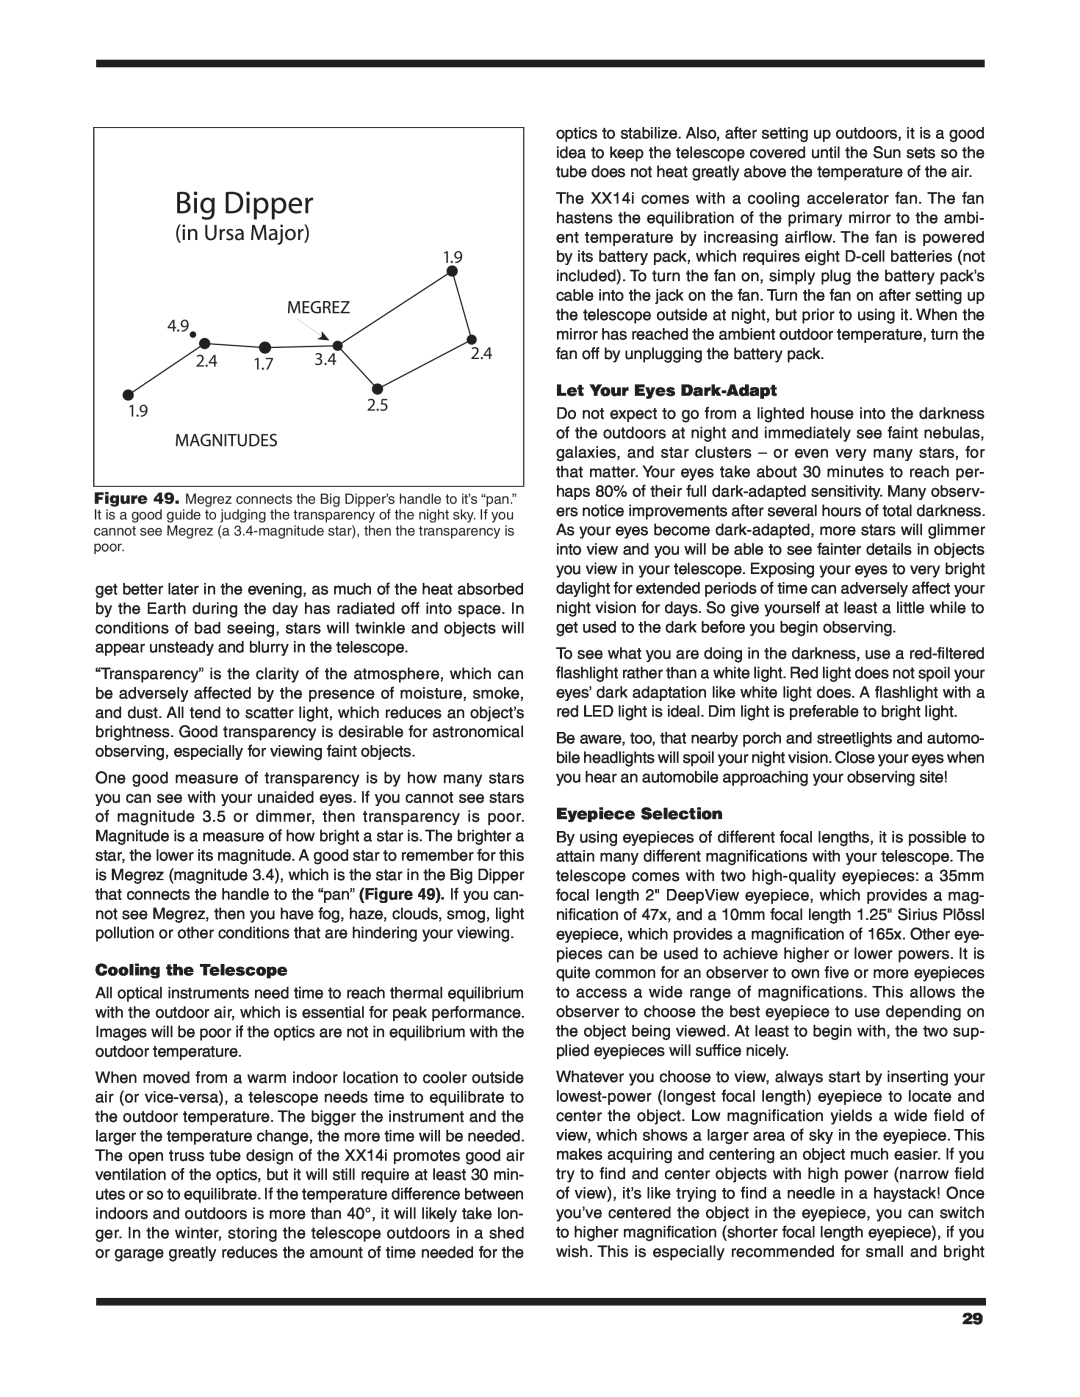 Orion 9791 instruction manual Cooling the Telescope, Let Your Eyes Dark-Adapt, Eyepiece Selection 